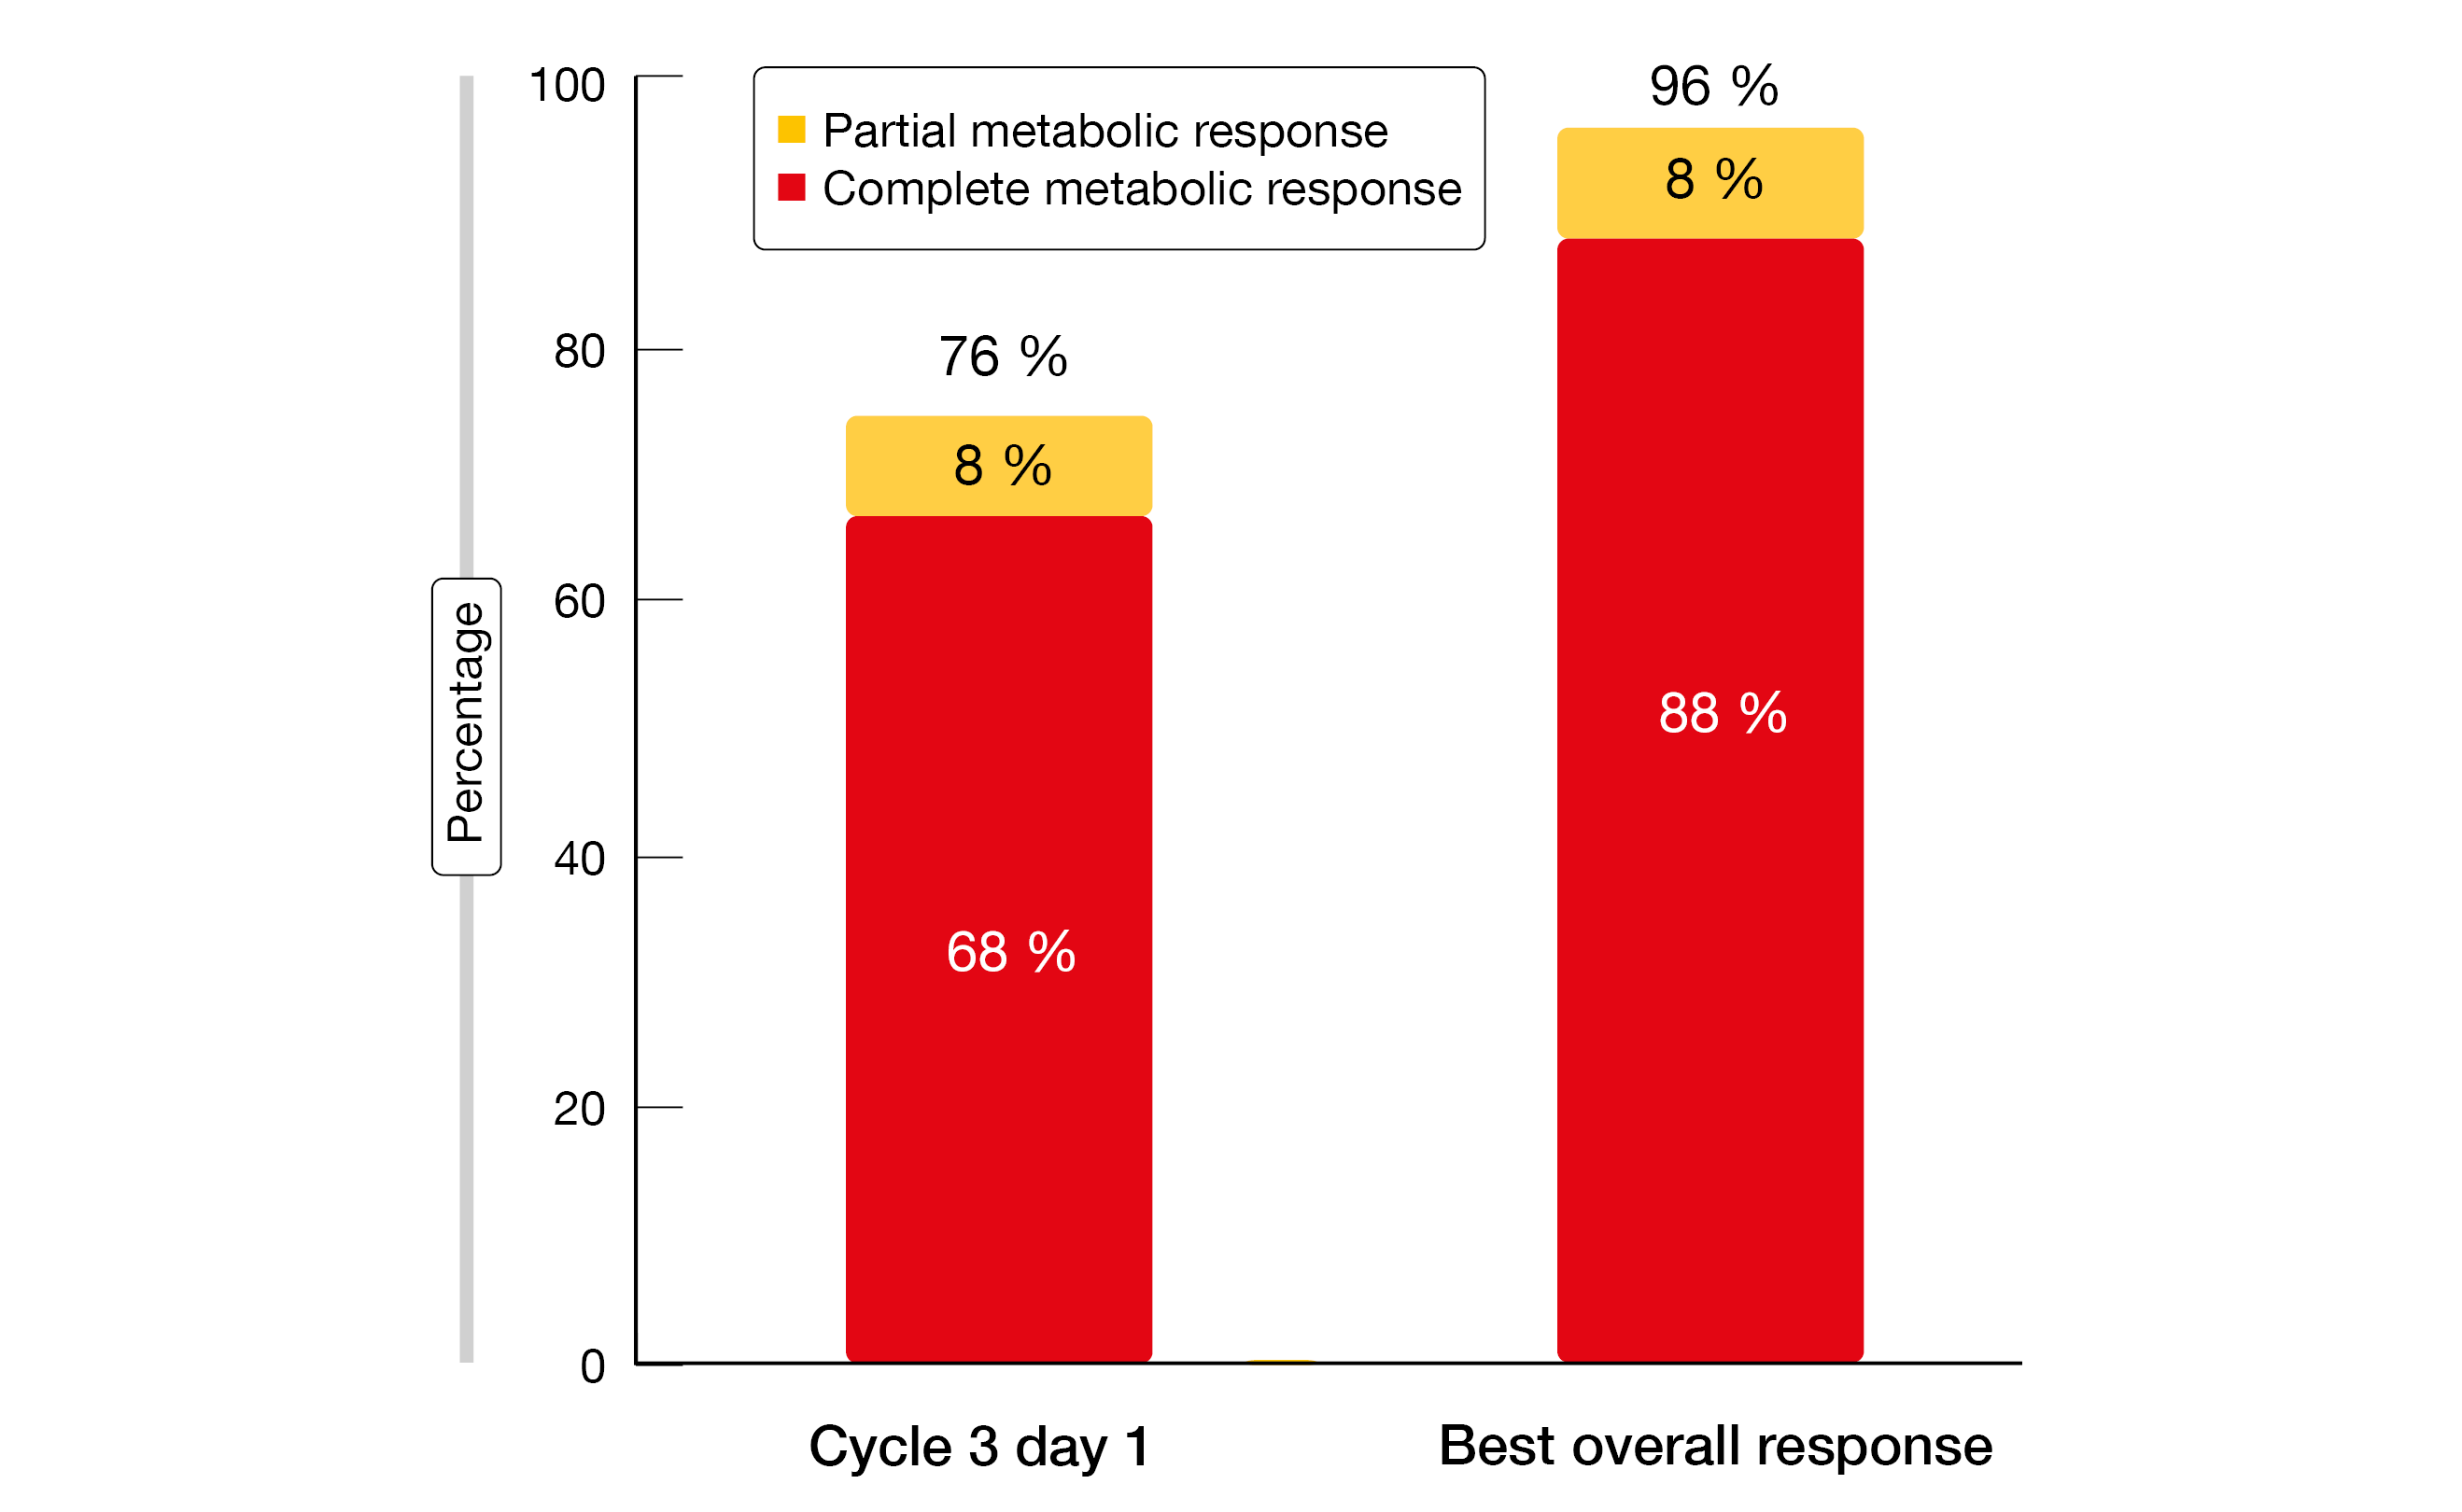 Figure 3: Response rates after two cycles of zanubrutinib and obinutuzumab (left) and best overall response with zanubrutinib, obinutuzumab and venetoclax (right)